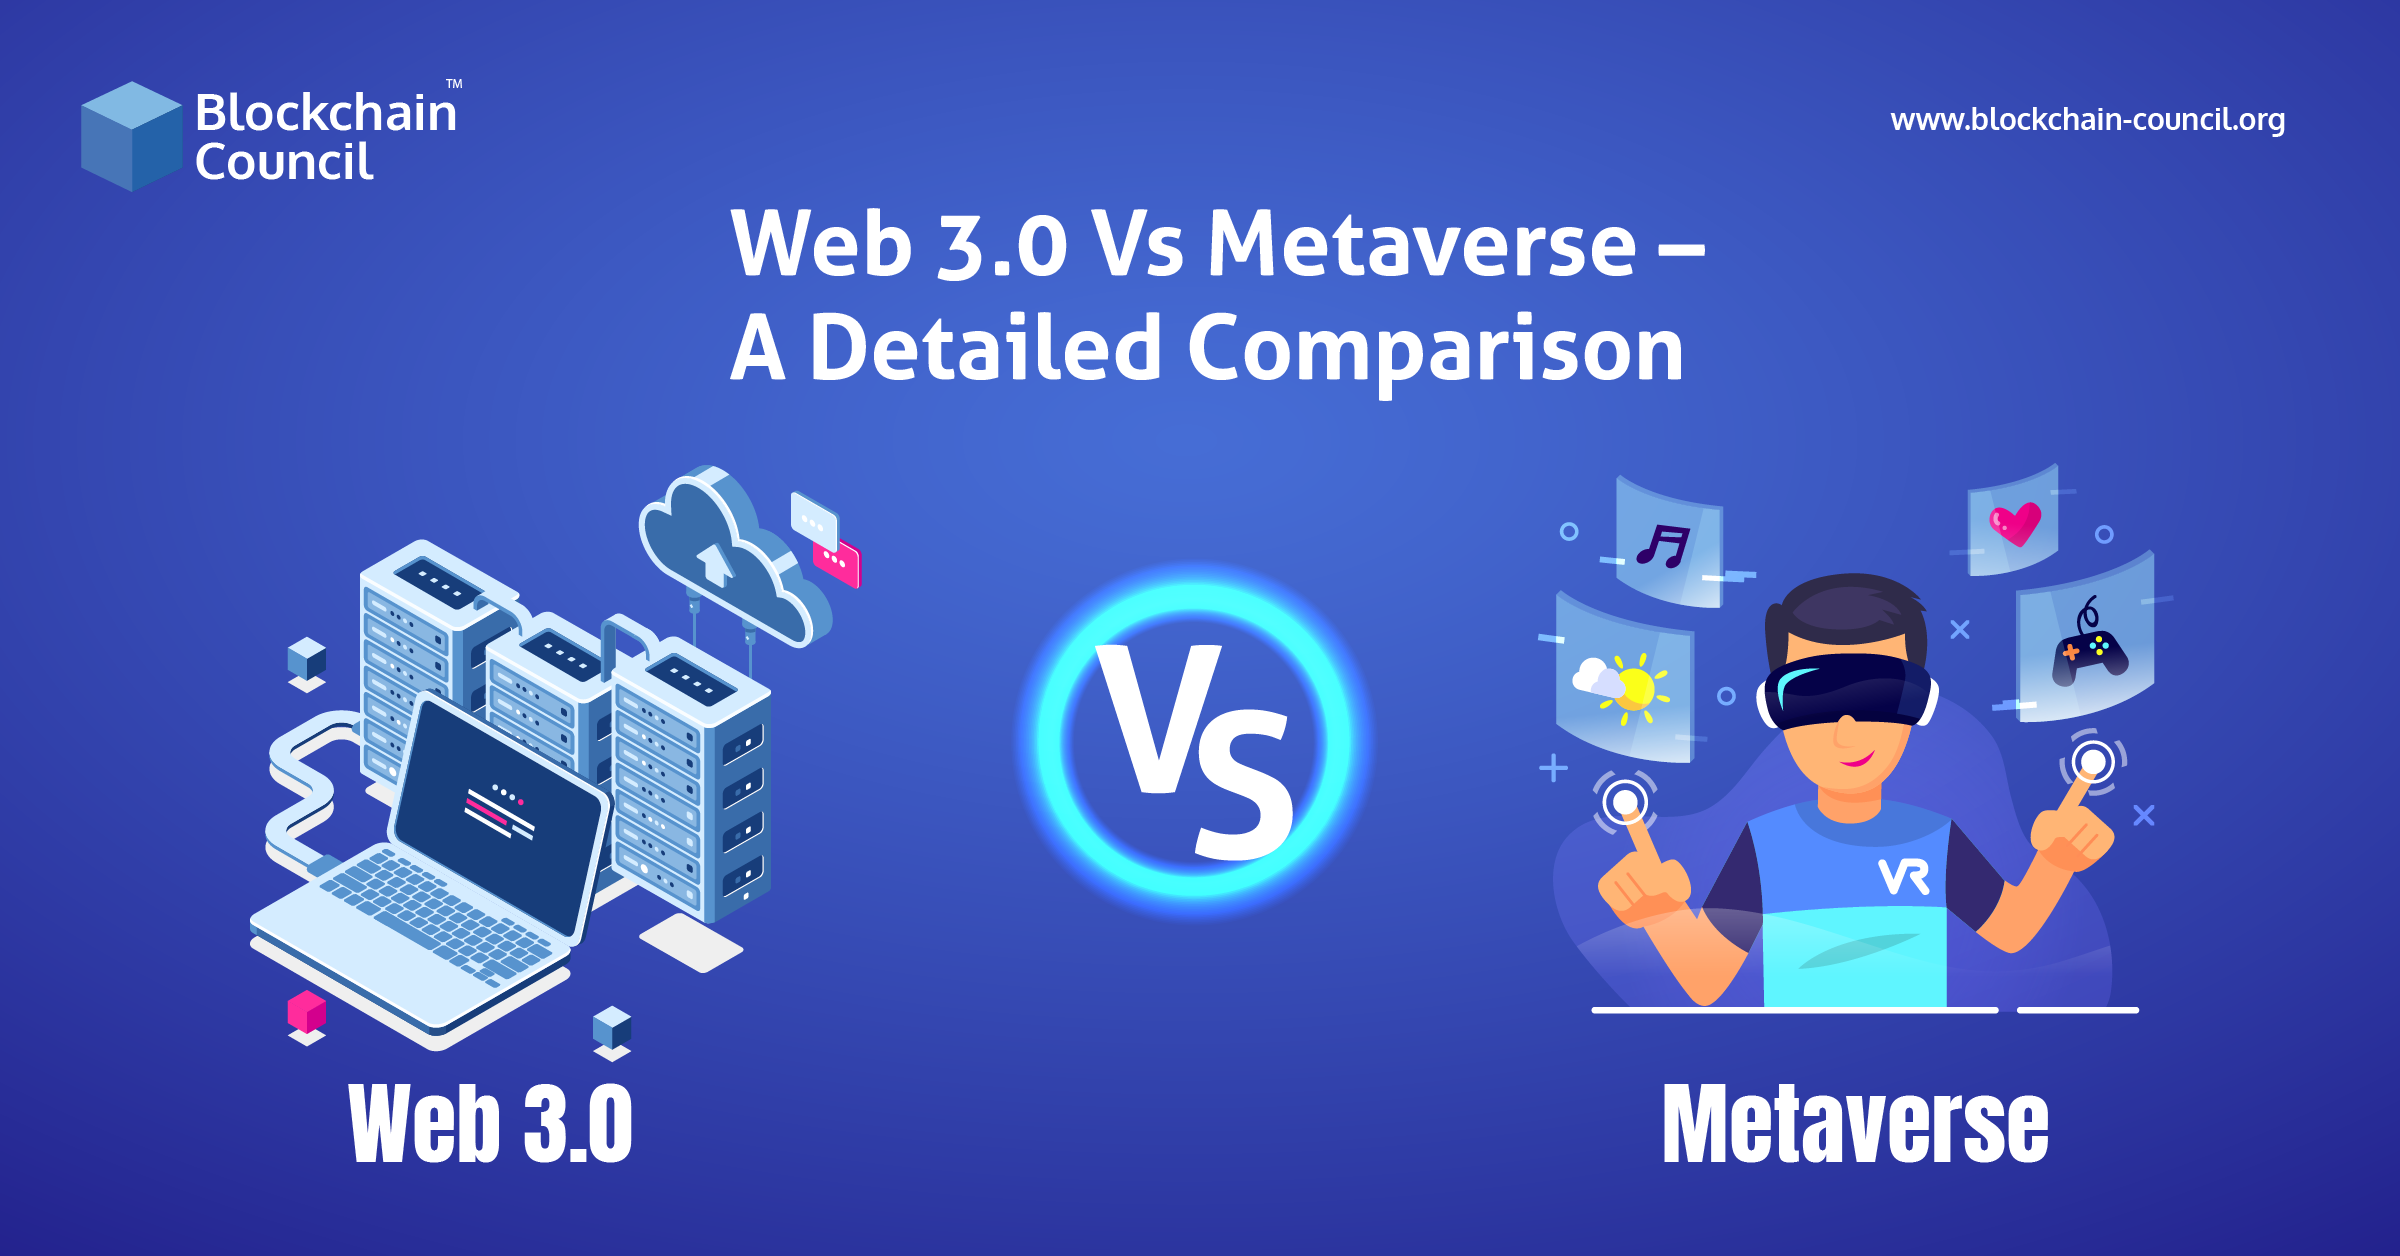 Is metaverse and Web 3.0 related?